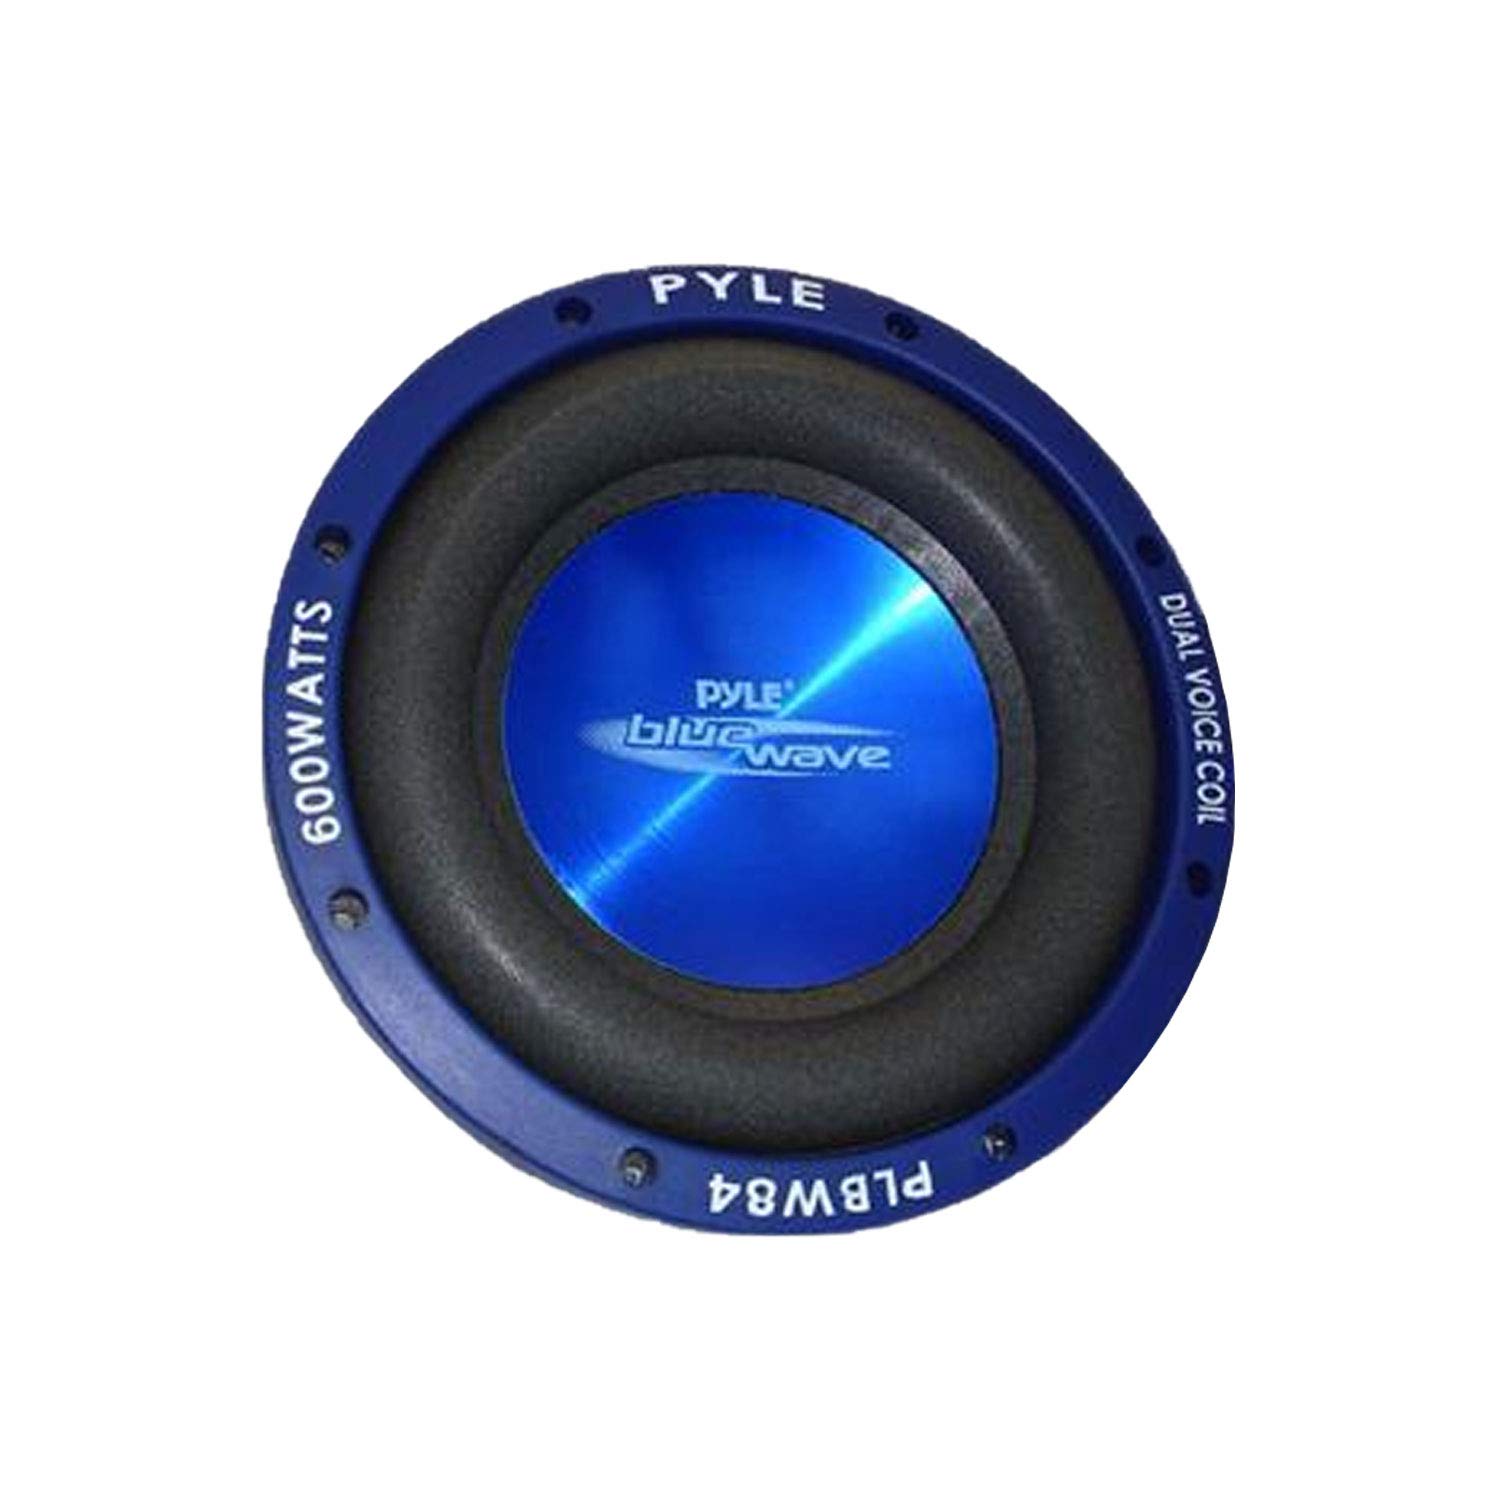 Pyle Car Vehicle Subwoofer Audio Speaker - 8 Inch Blue Injection Molded Cone, Blue Chrome-Plated Plastic Basket, Dual Voice Coil 4 Ohm Impedance, 600 Watt Power, Vehicle Stereo Sound System PLBW84